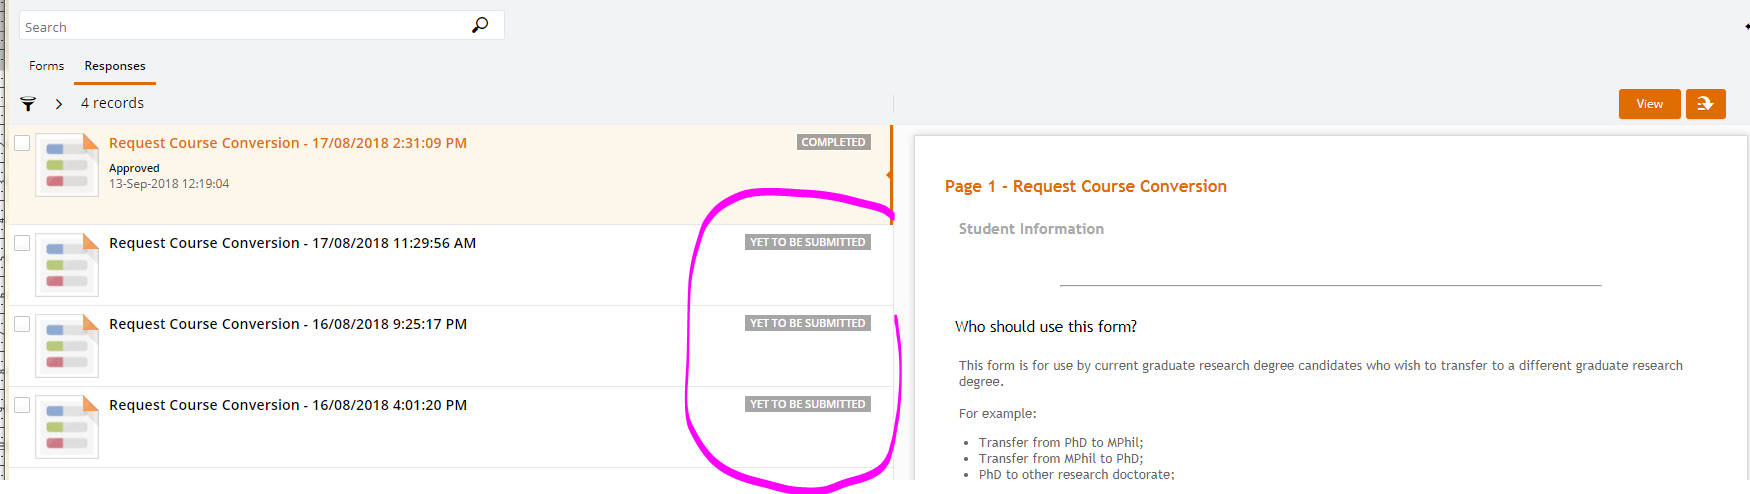 StudentOne screenshot with Yet to be Submitted status circled